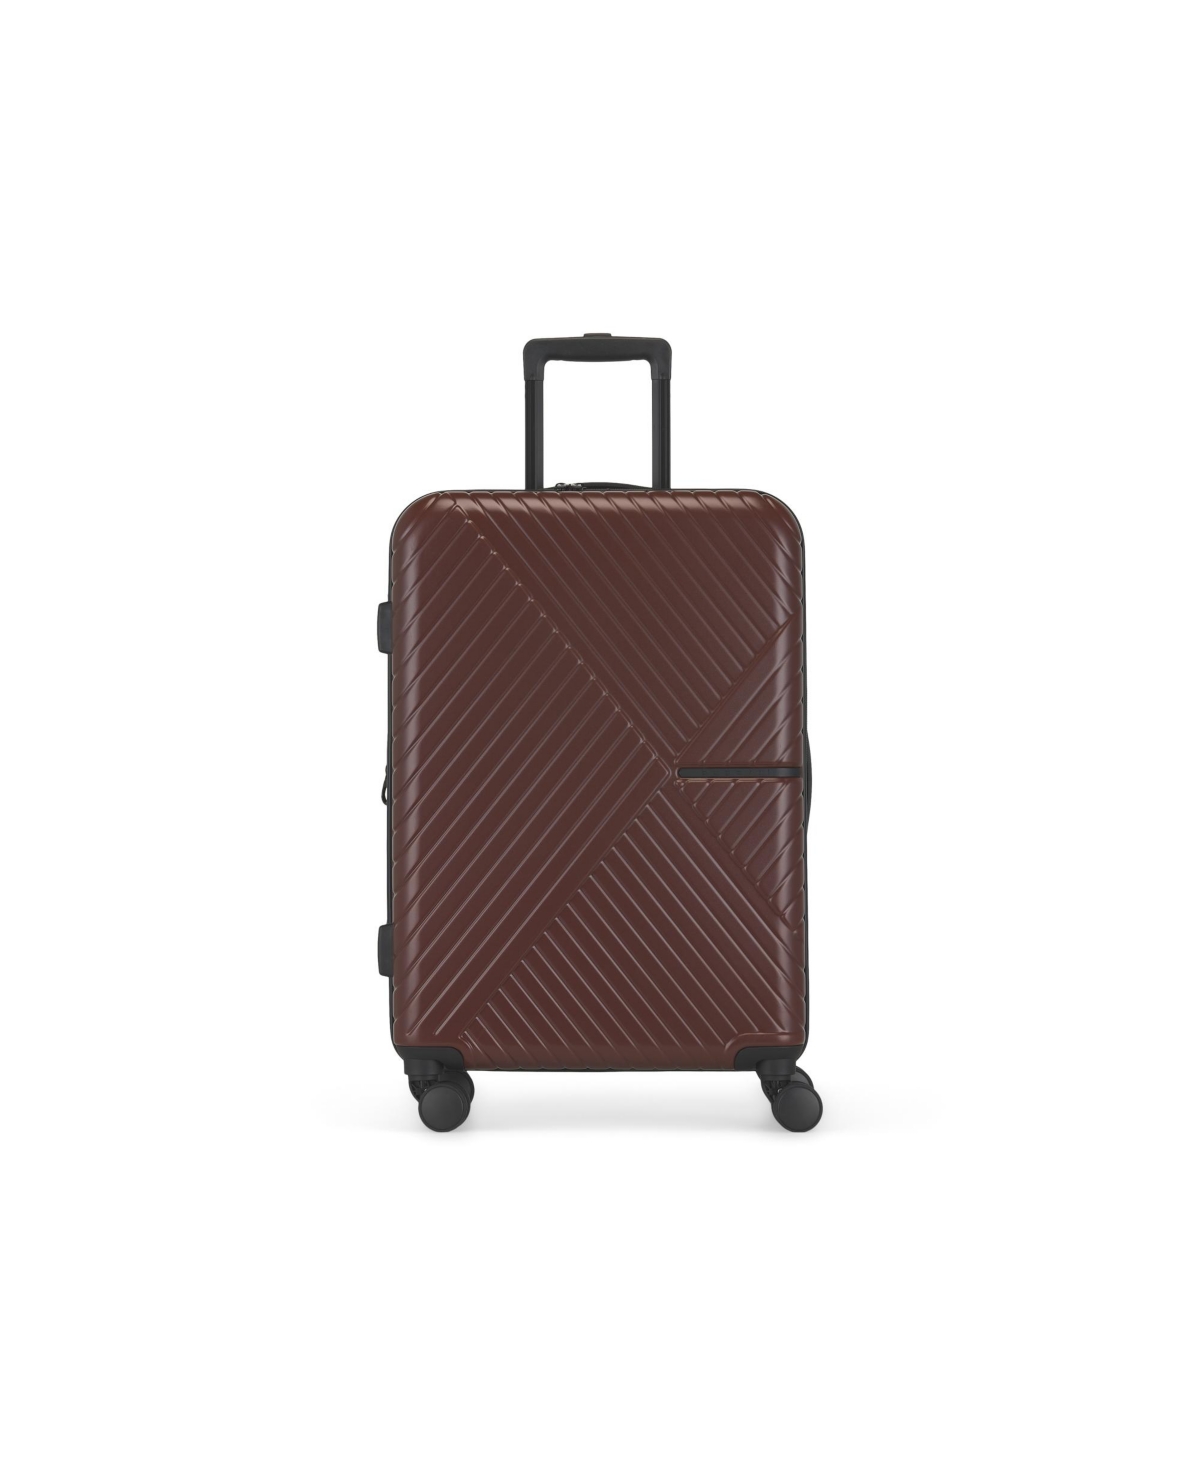 Berlin 24" Upright Abs Luggage - Mink